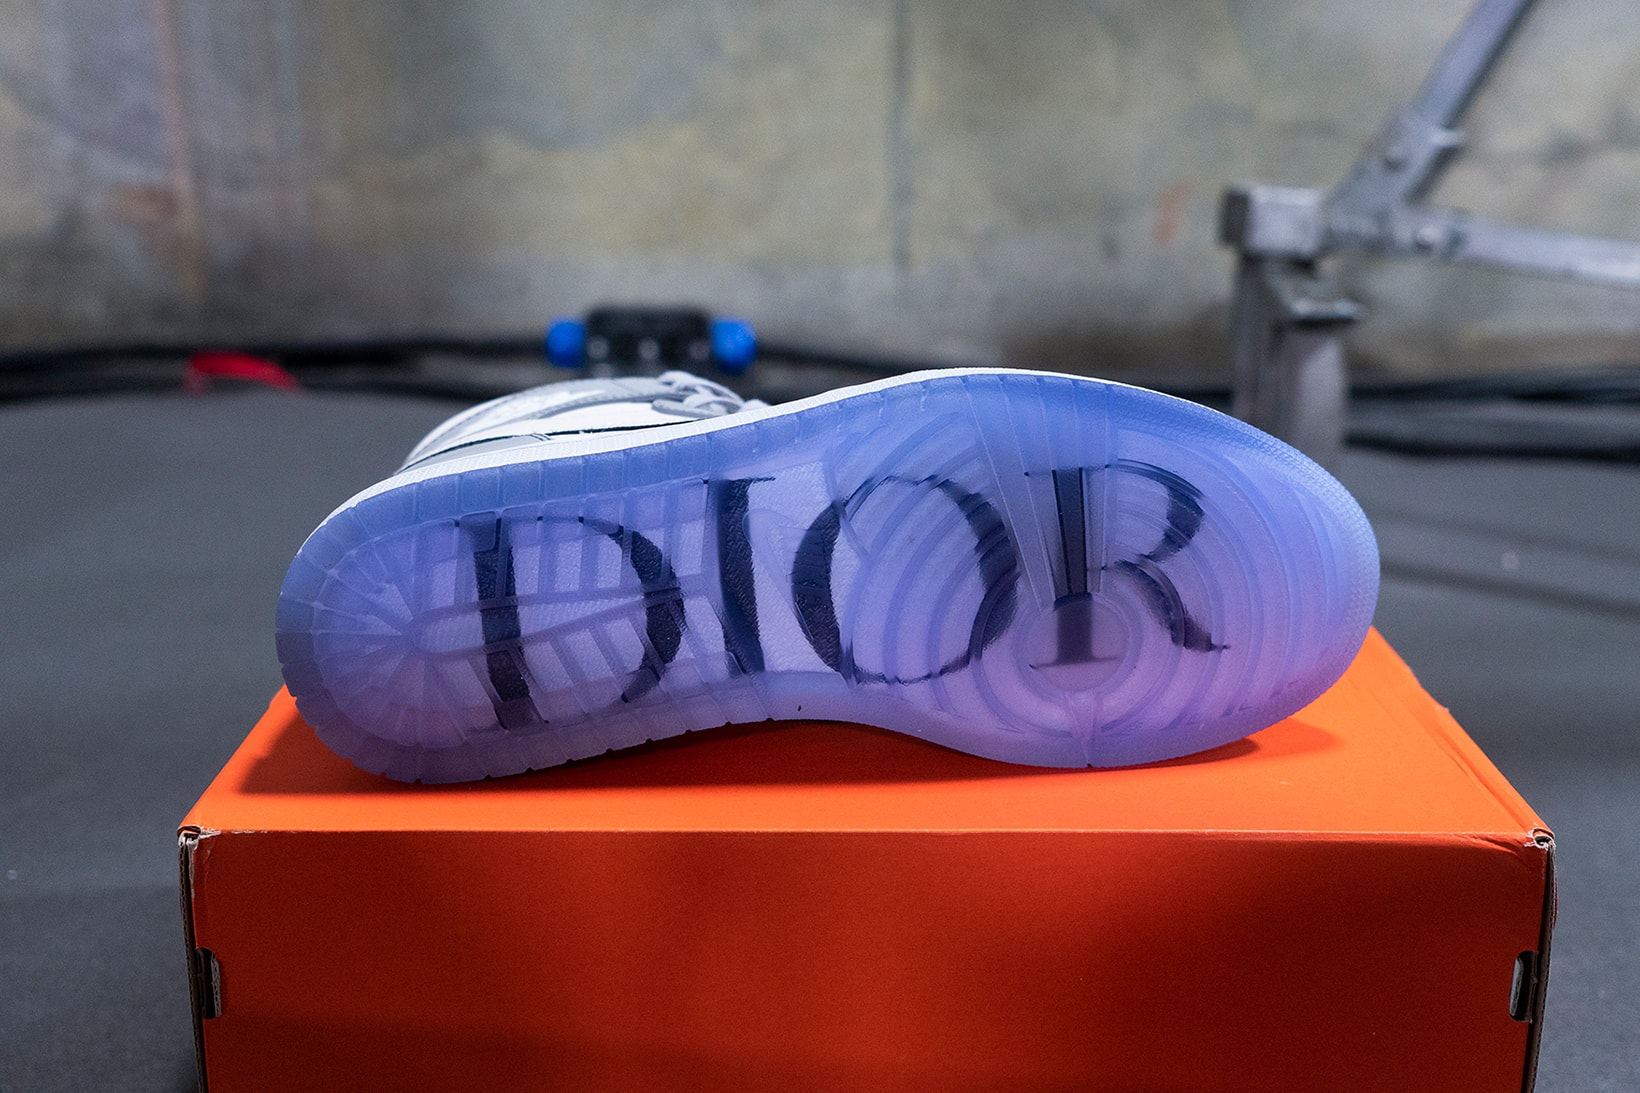 Nike's 5 most iconic sneaker collaborations – from the Dior x Air Jordan 1  to Comme des Garçons, Sacai and more fashion brands